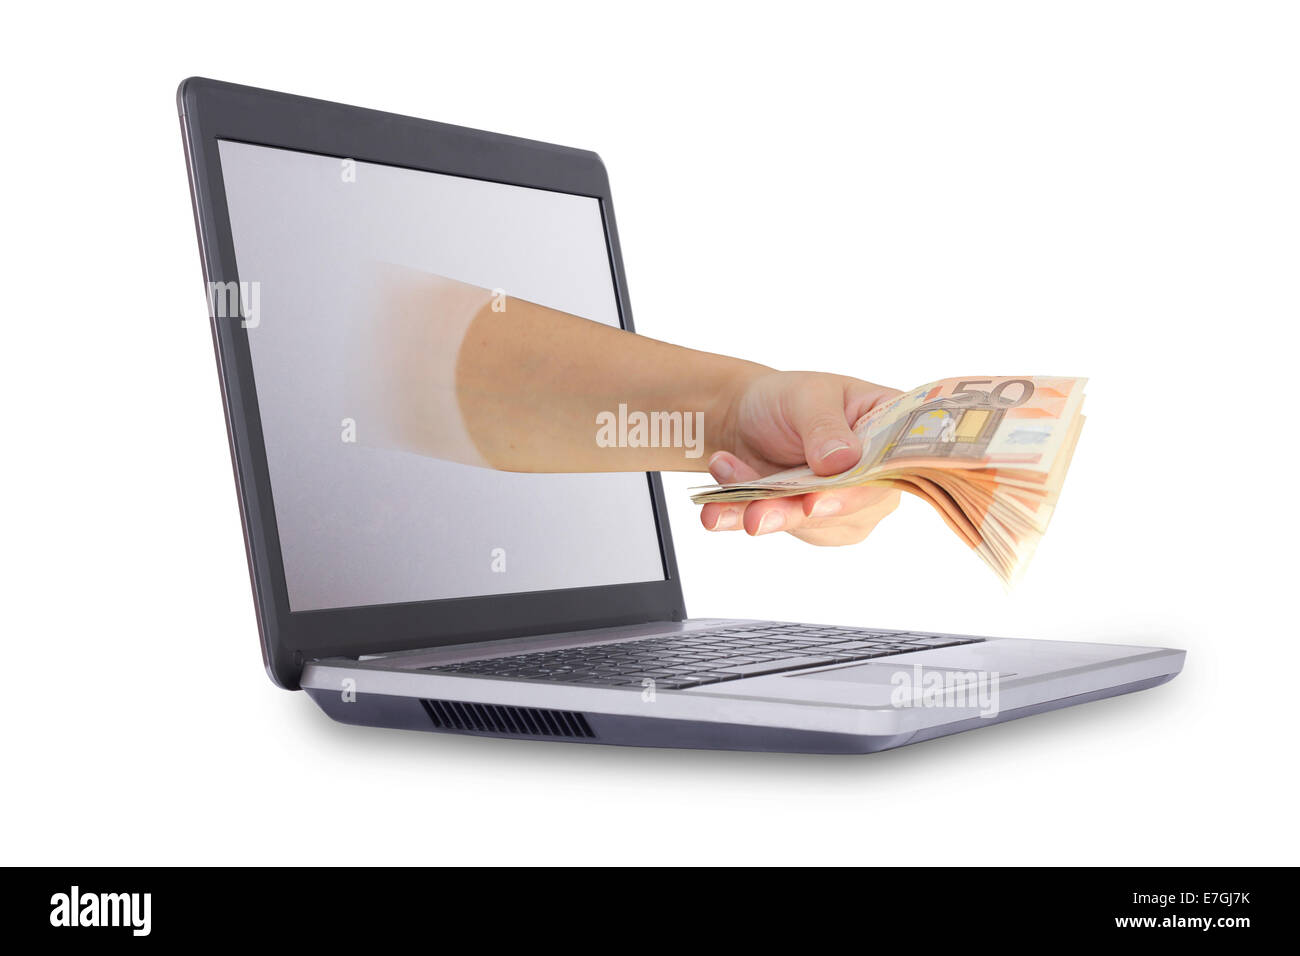 Concept of earn money online, on white background Stock Photo